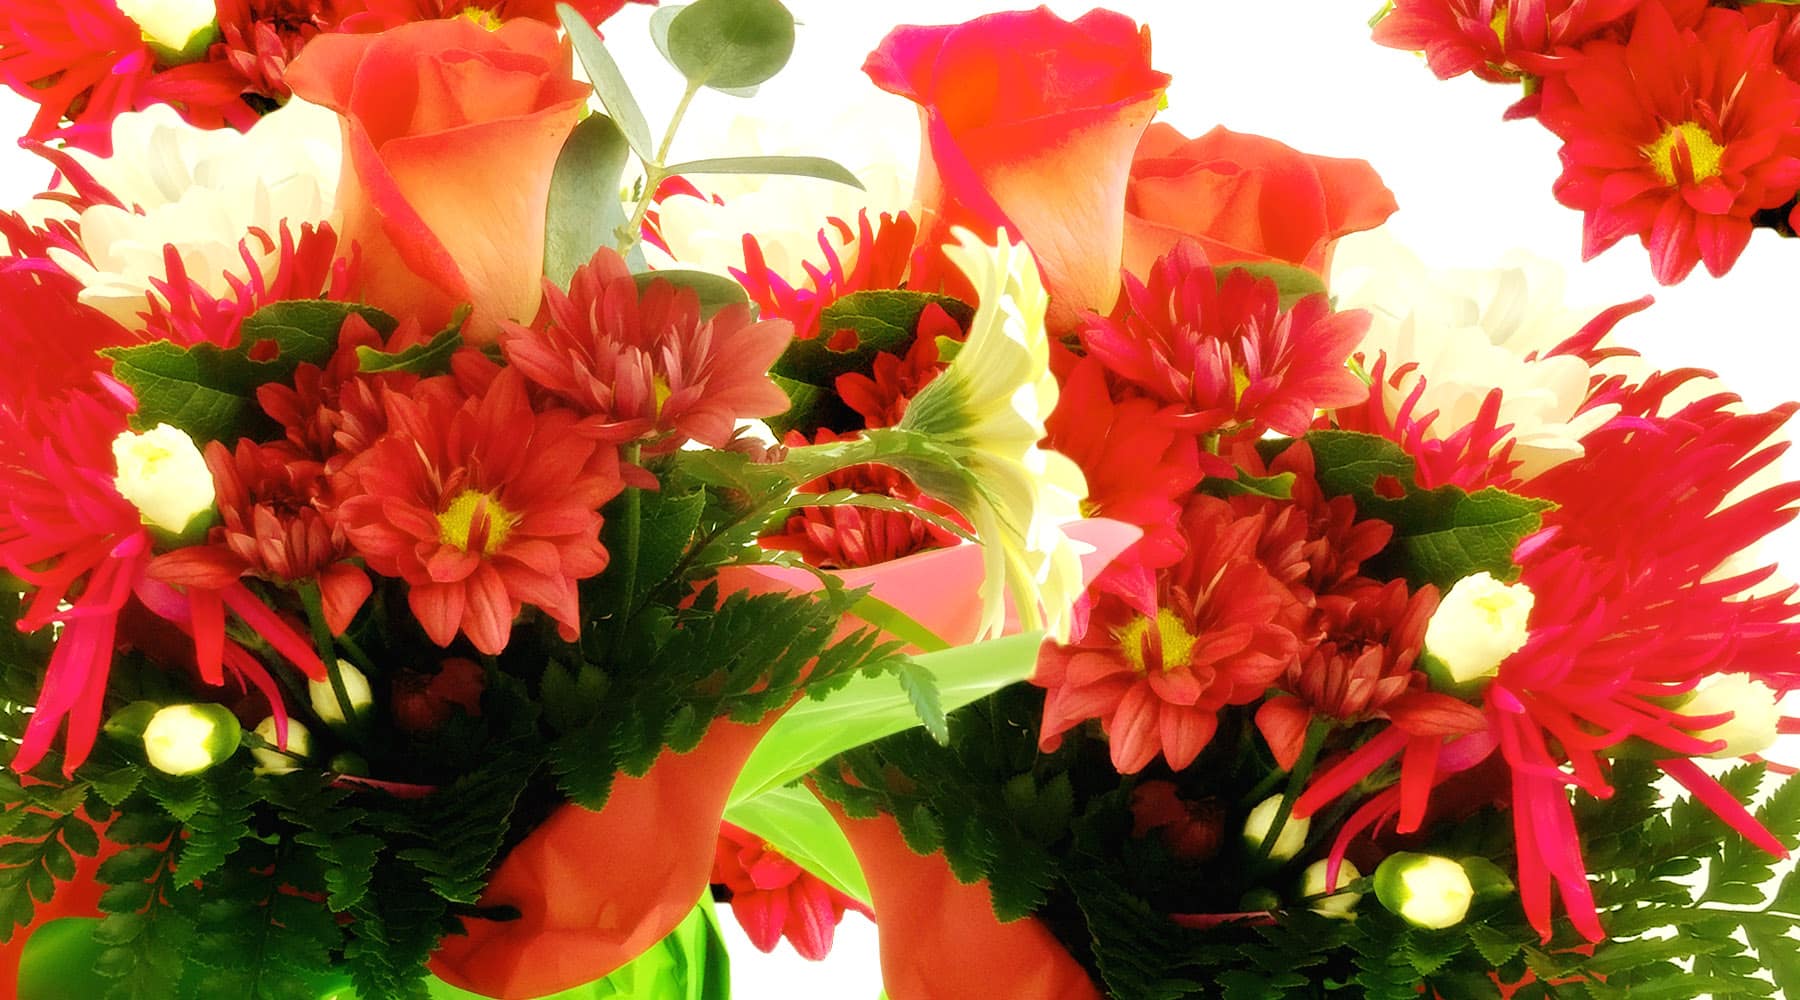 Where Is The Best Place To Order Flowers Online?